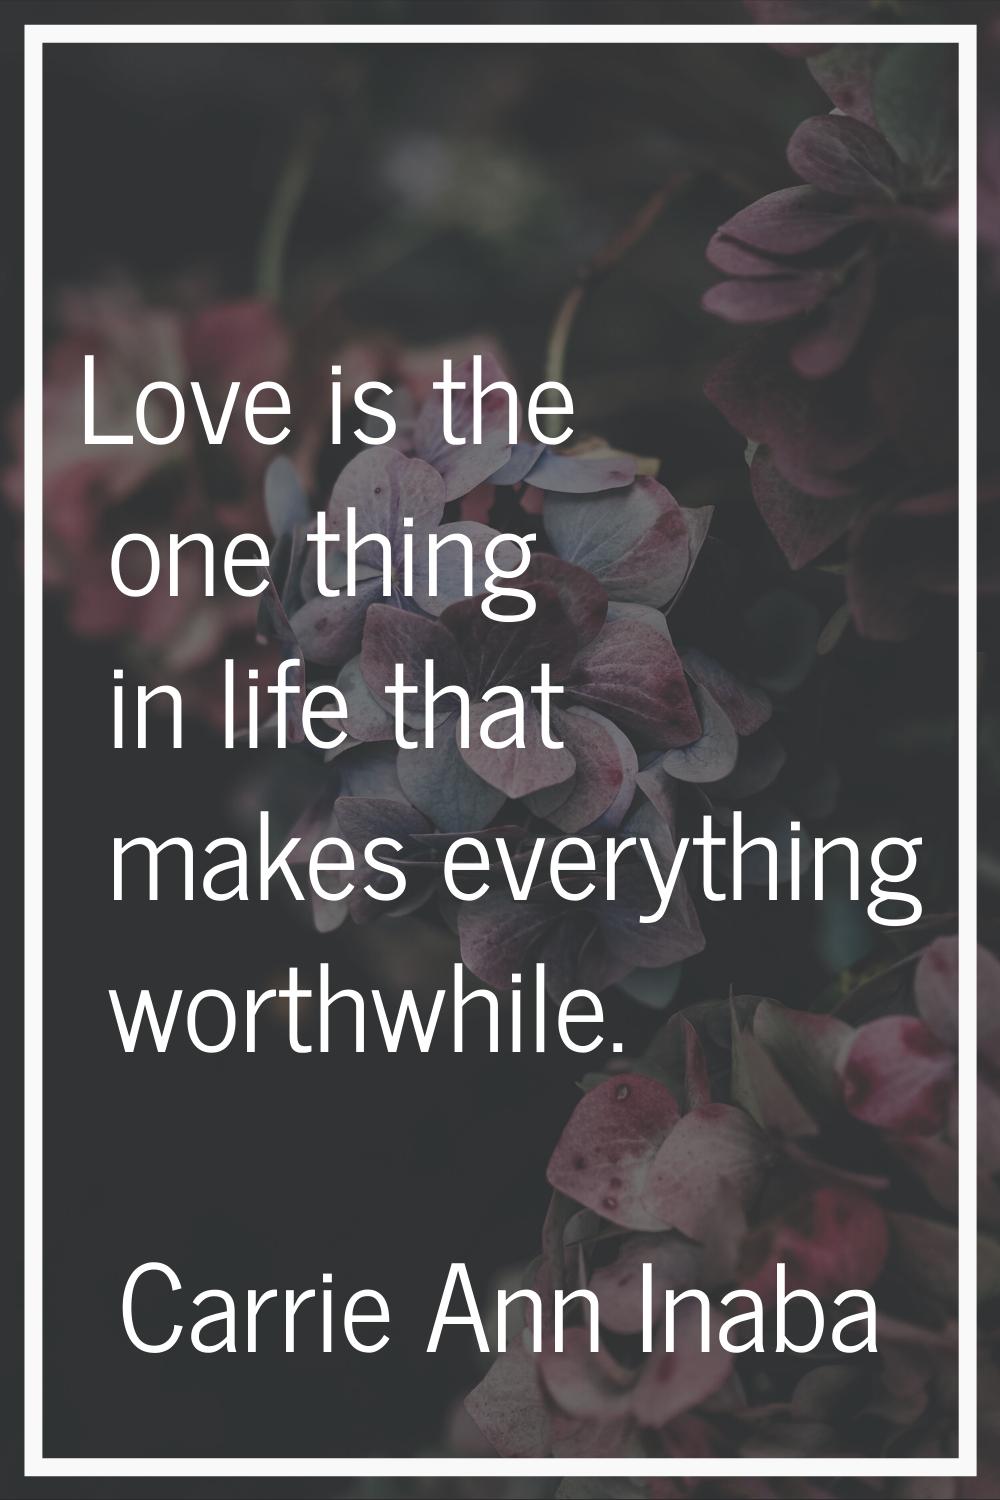 Love is the one thing in life that makes everything worthwhile.